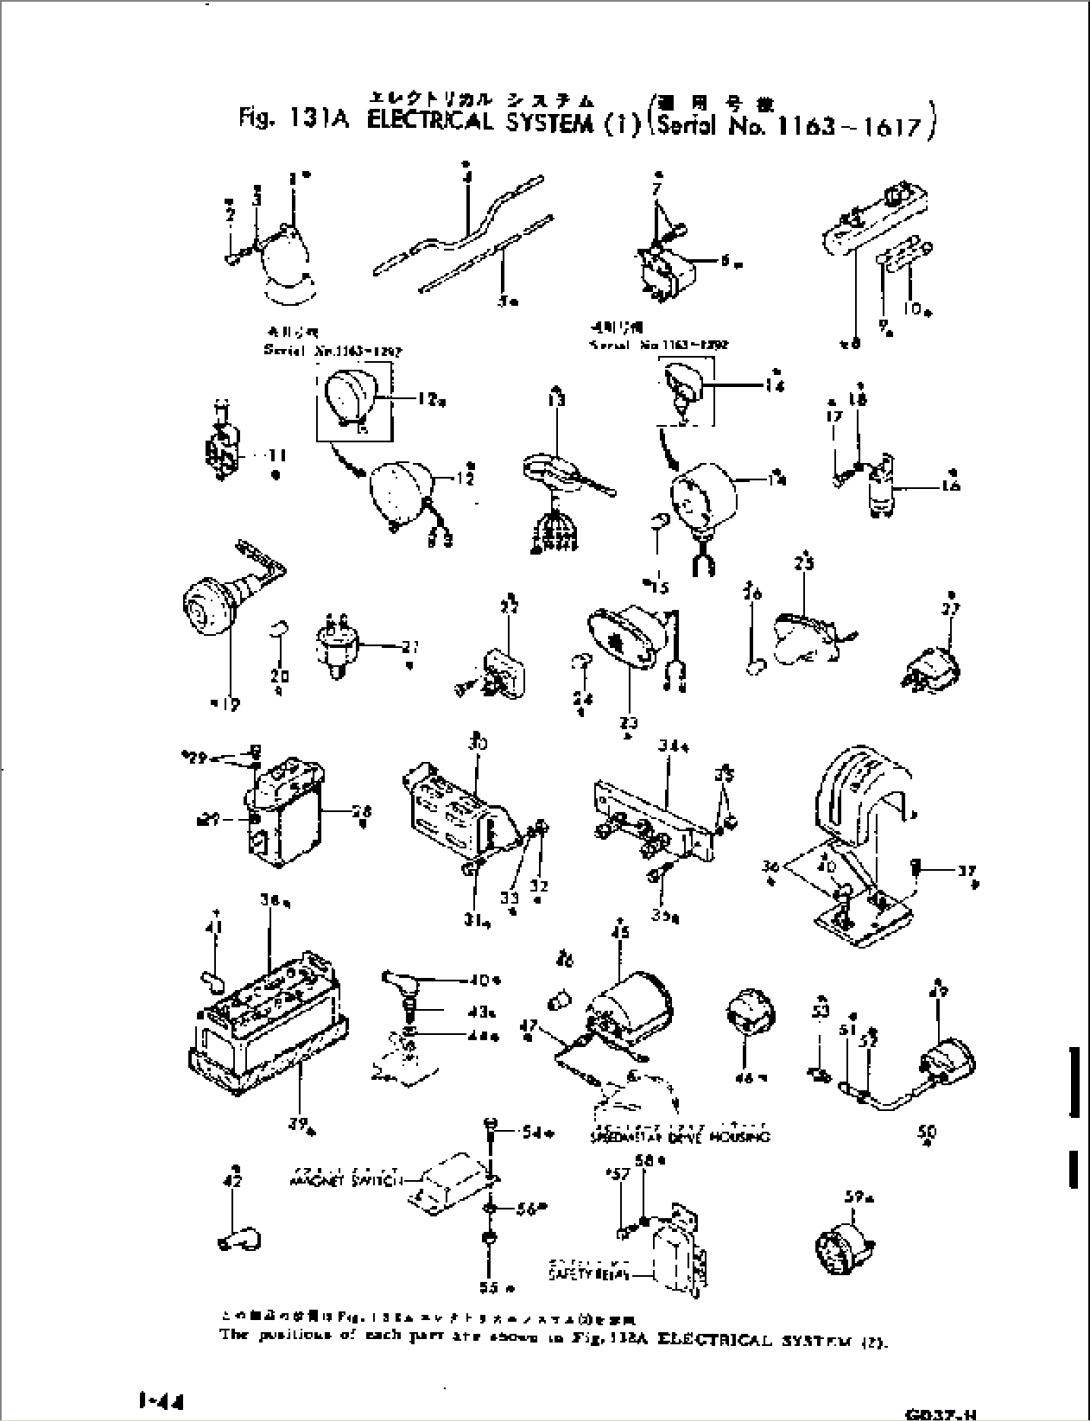 ELECTRICAL SYSTEM (1)(#1163-1617)